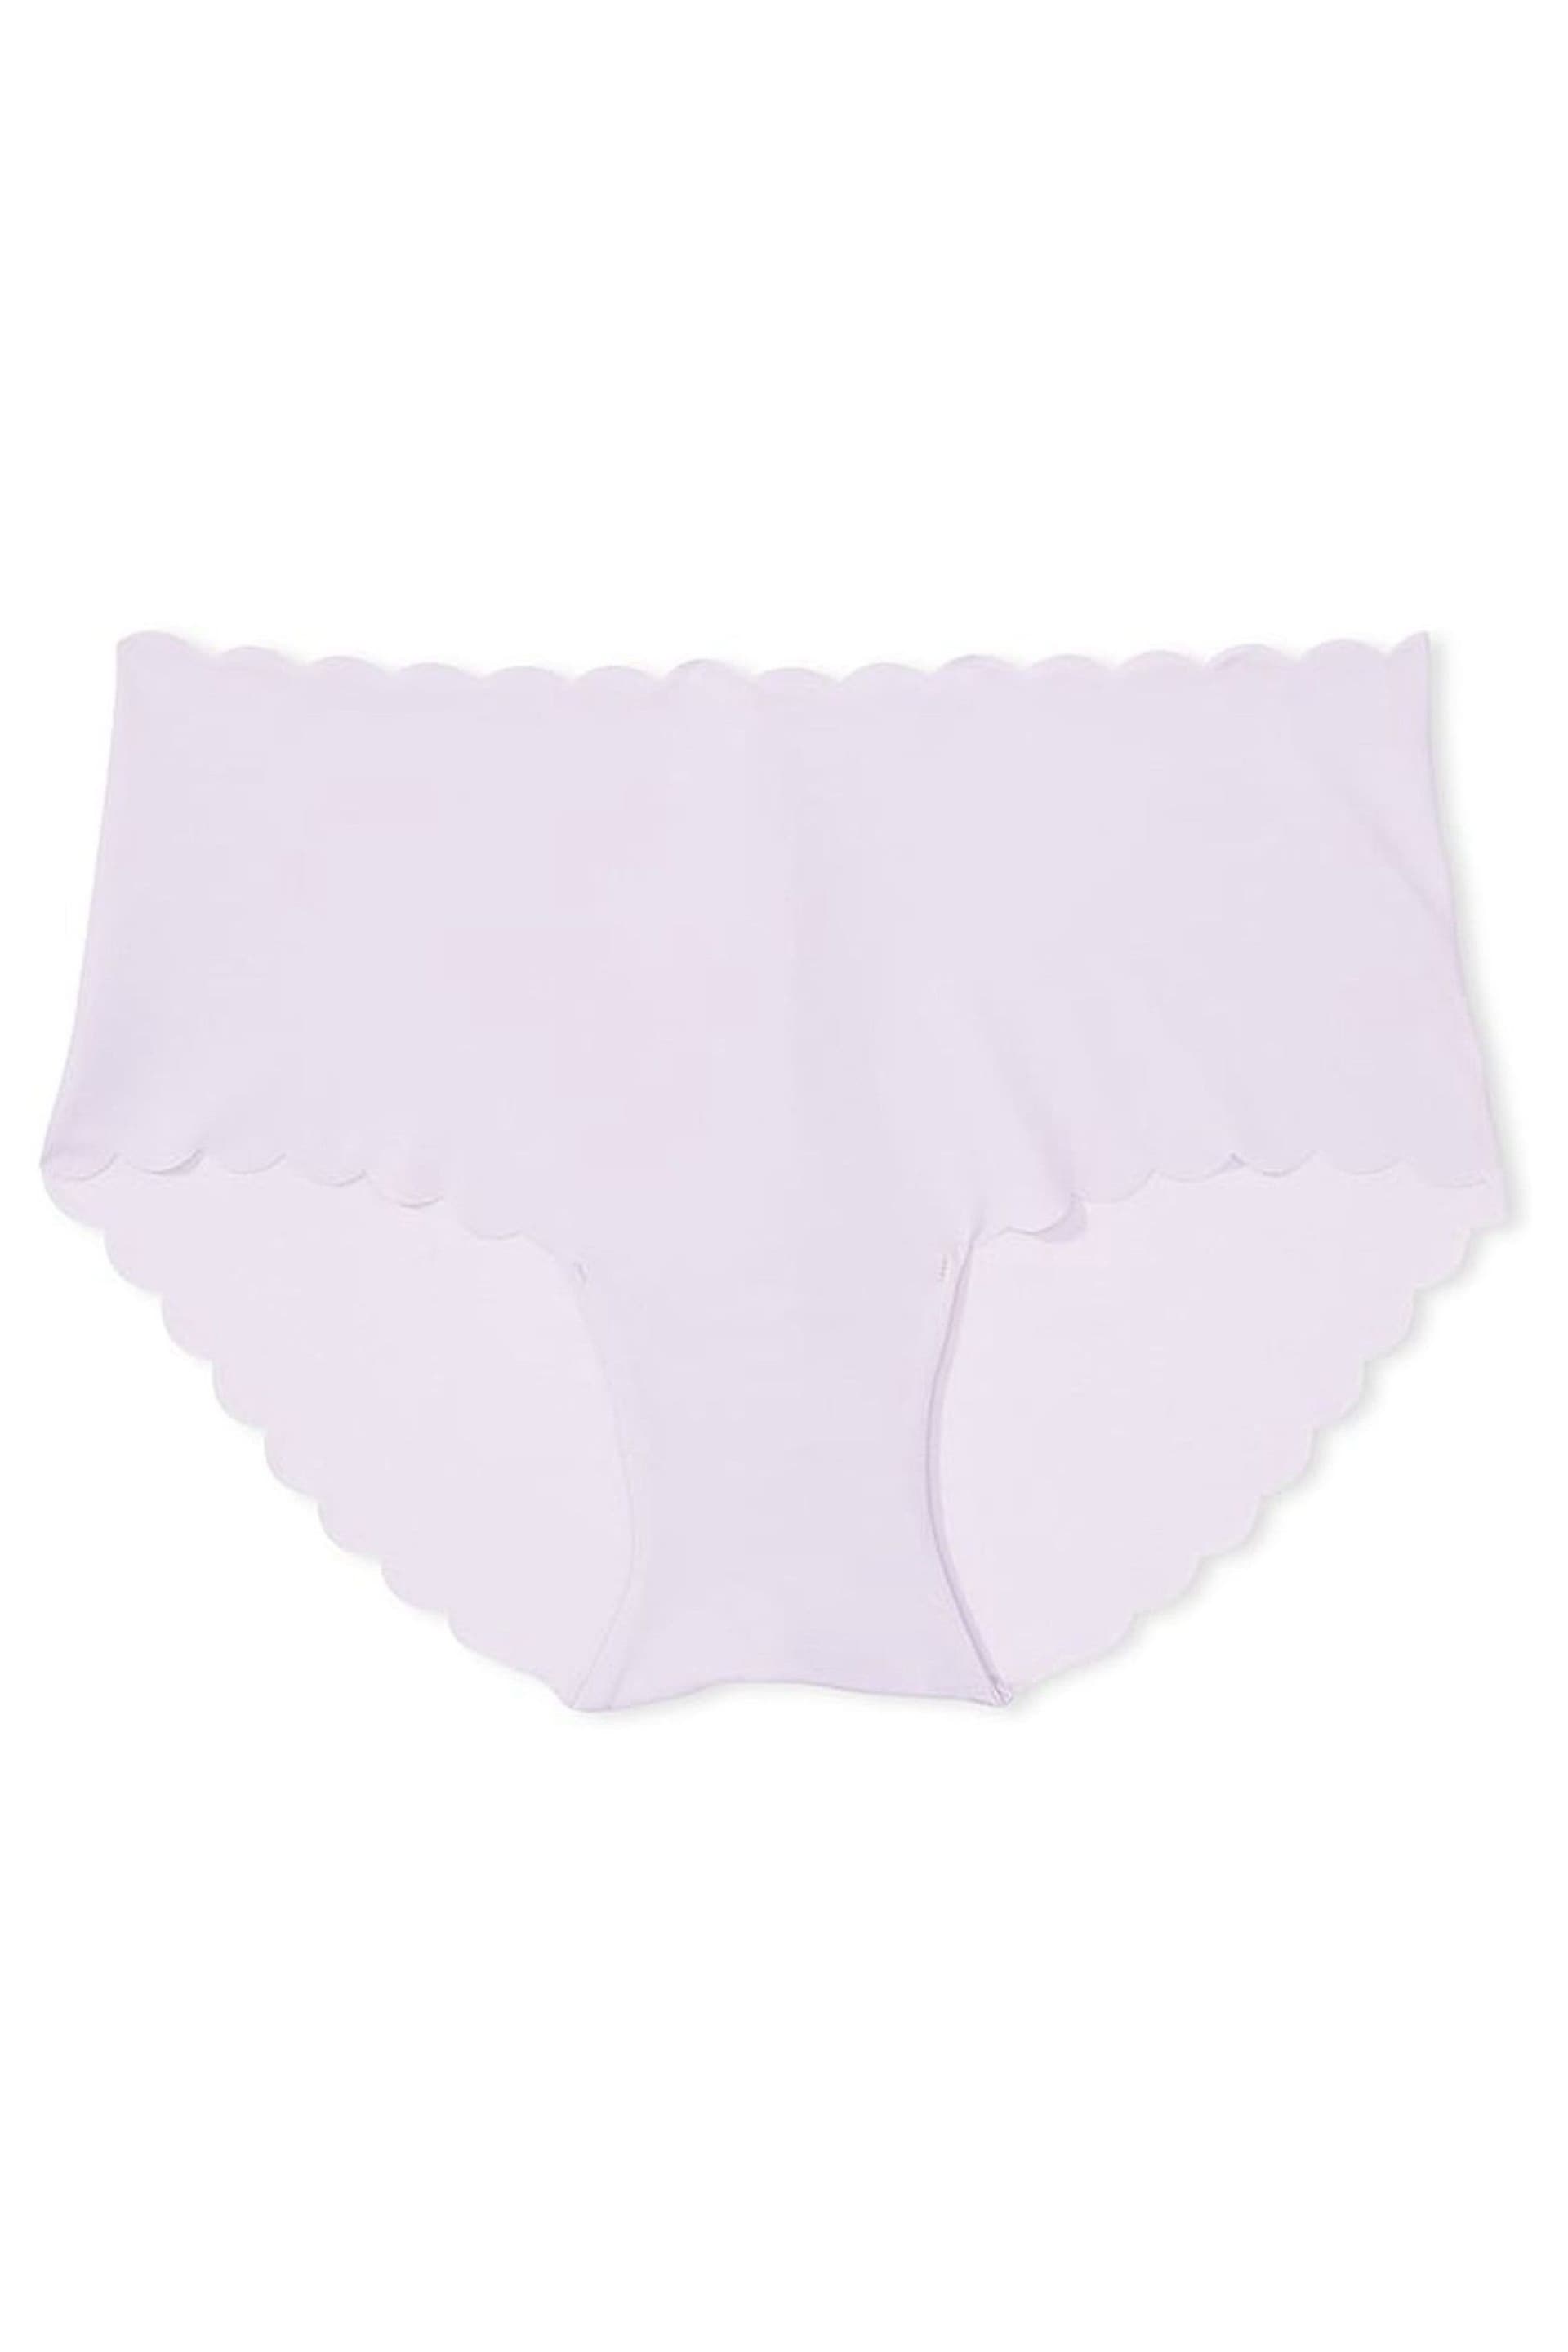 Victoria's Secret Lucky Lilac Purple Smooth Hipster Knickers - Image 4 of 4